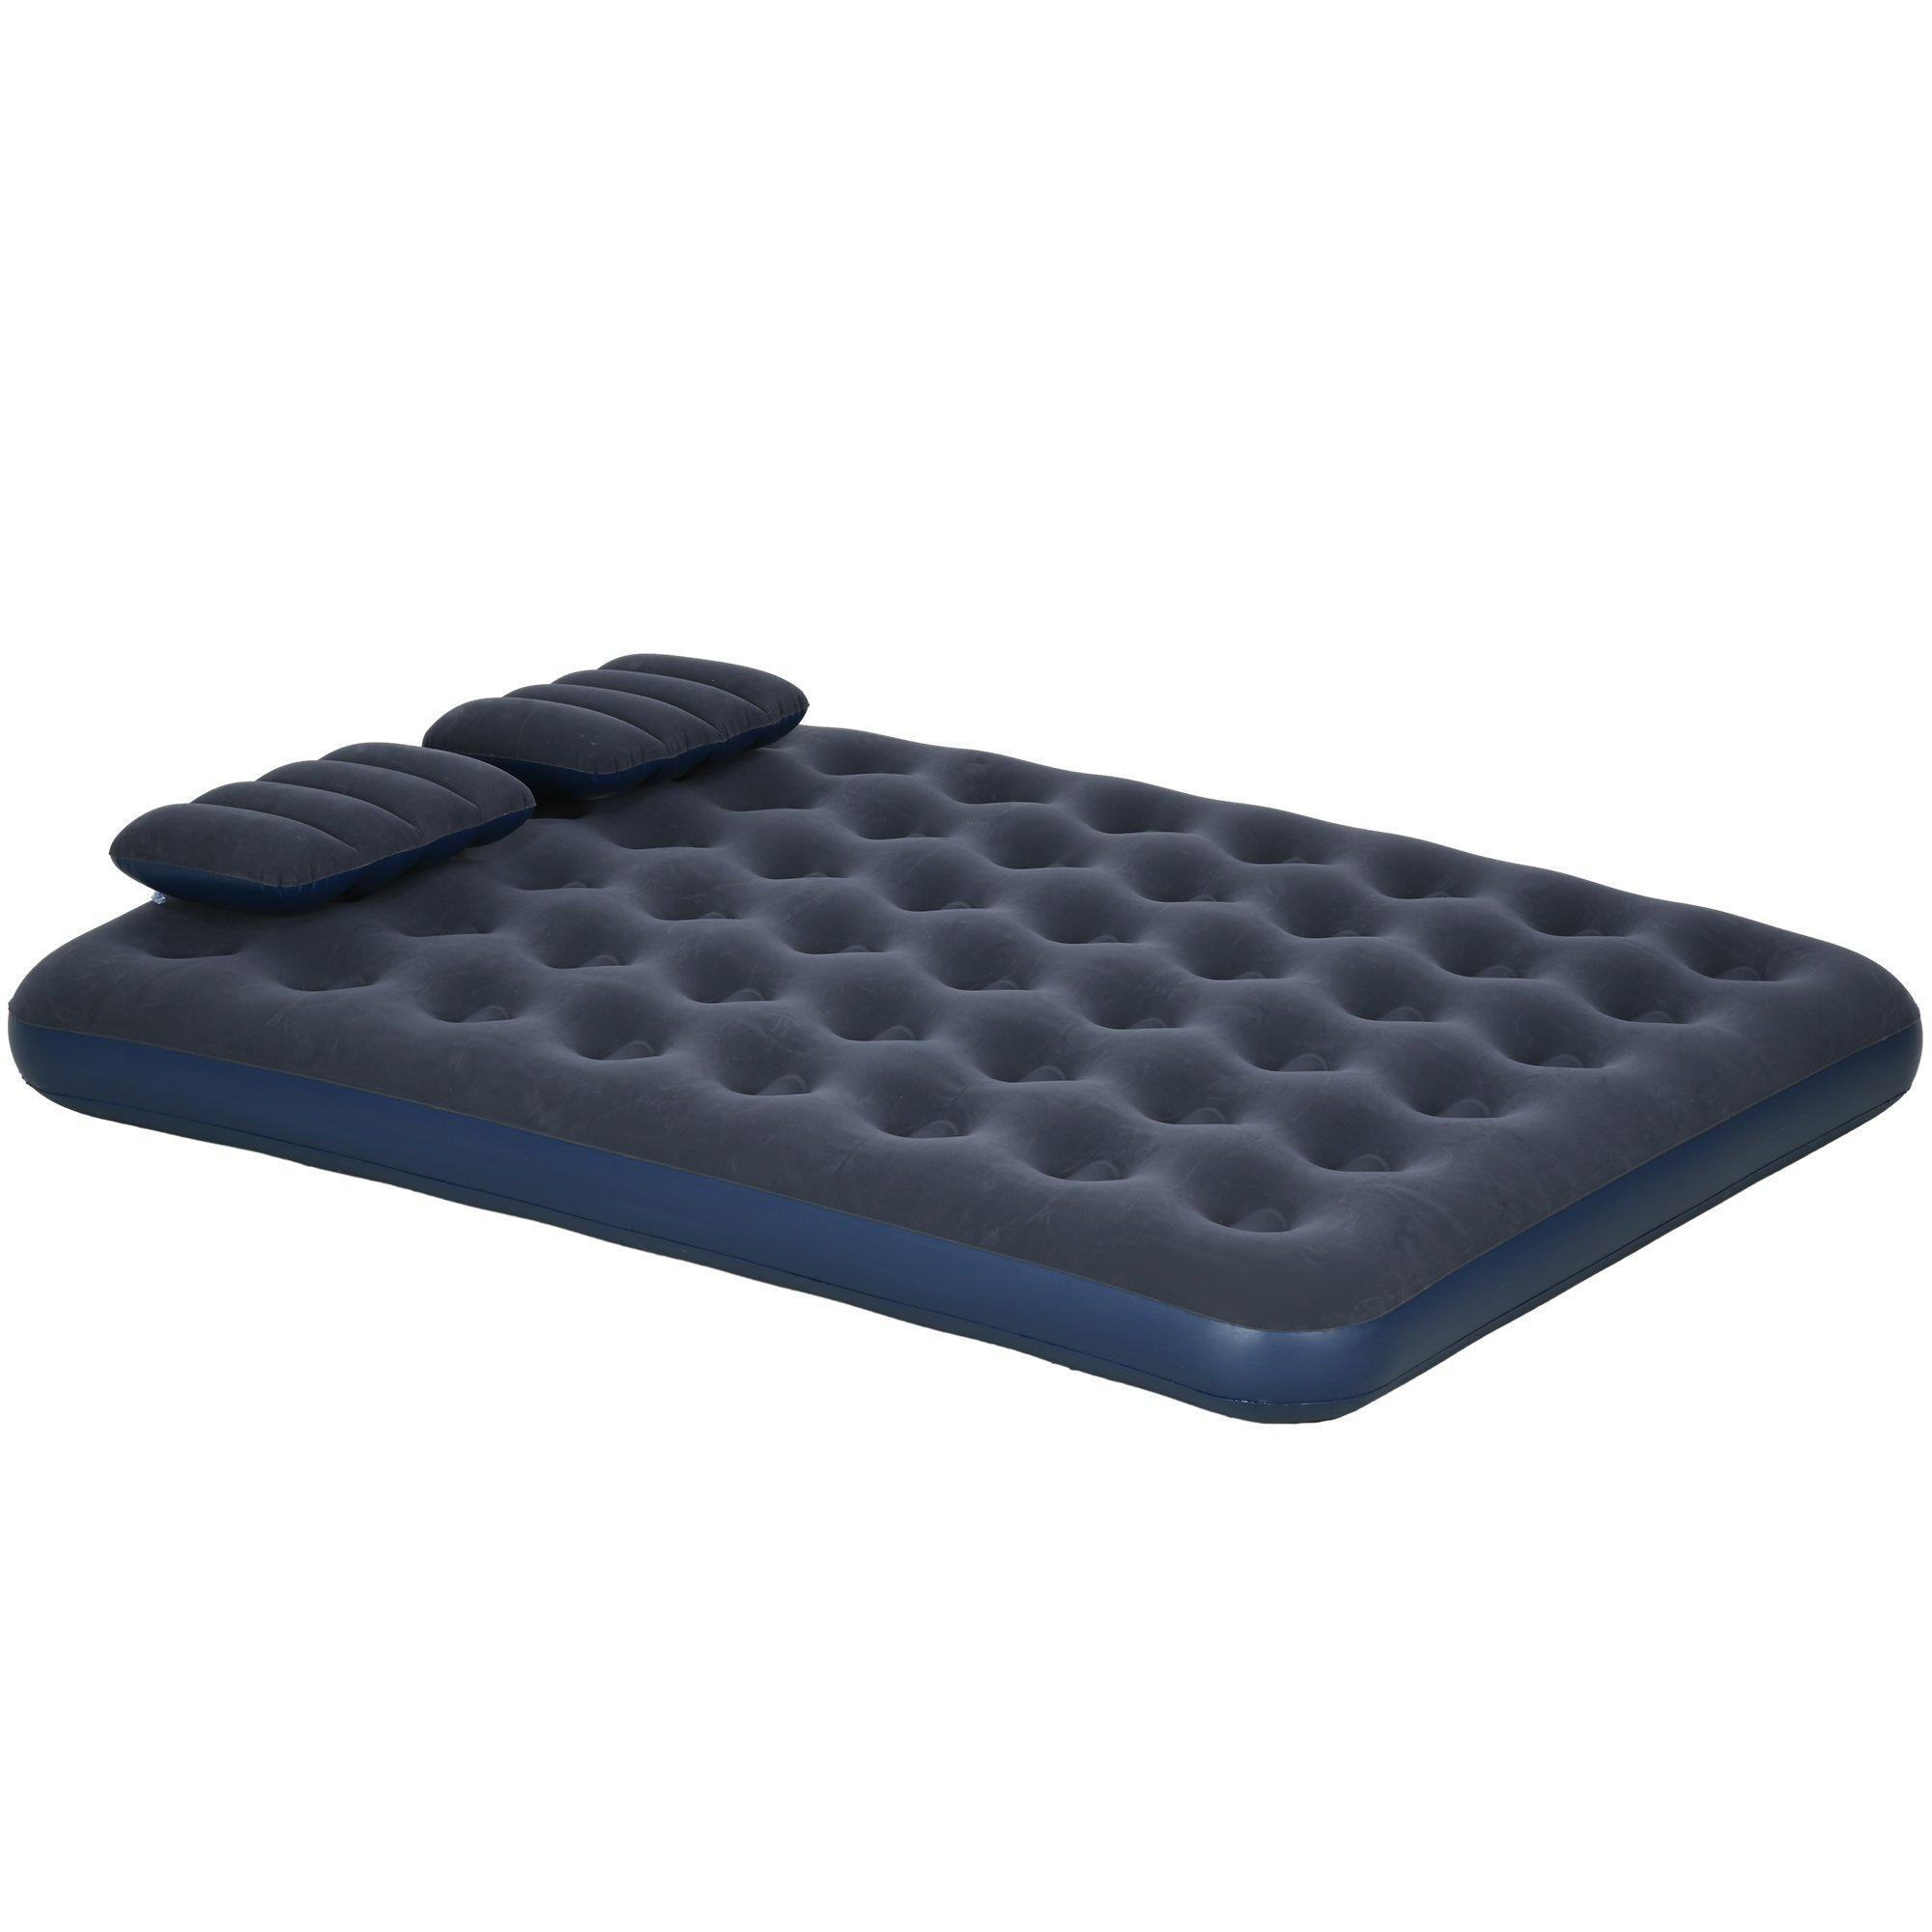 Double Air Bed with 2 Pillows, Inflatable Mattress, Blue, 191 x 137 x 22cm - image 1